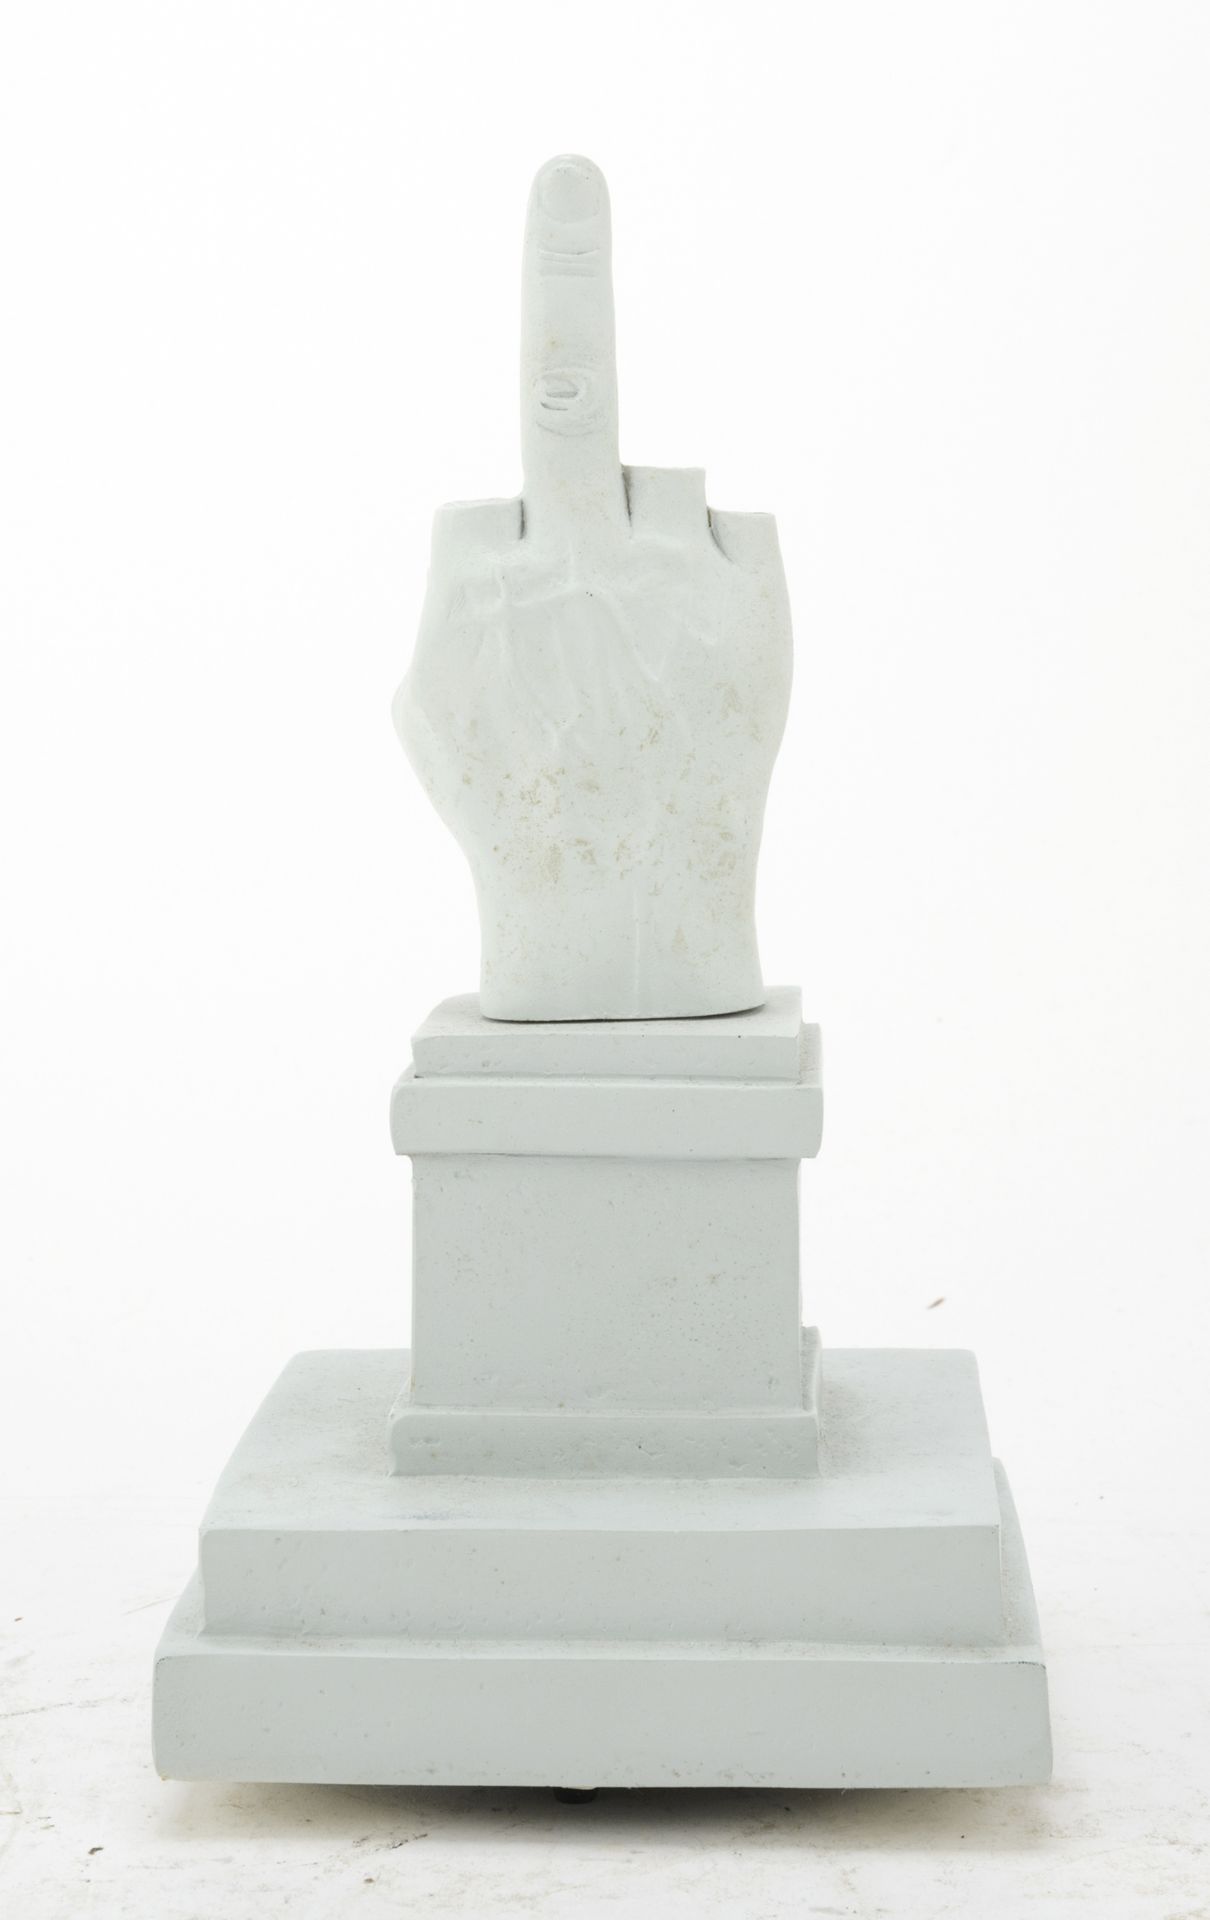 RESIN REPRODUCTION BY MAURIZIO CATTELAN